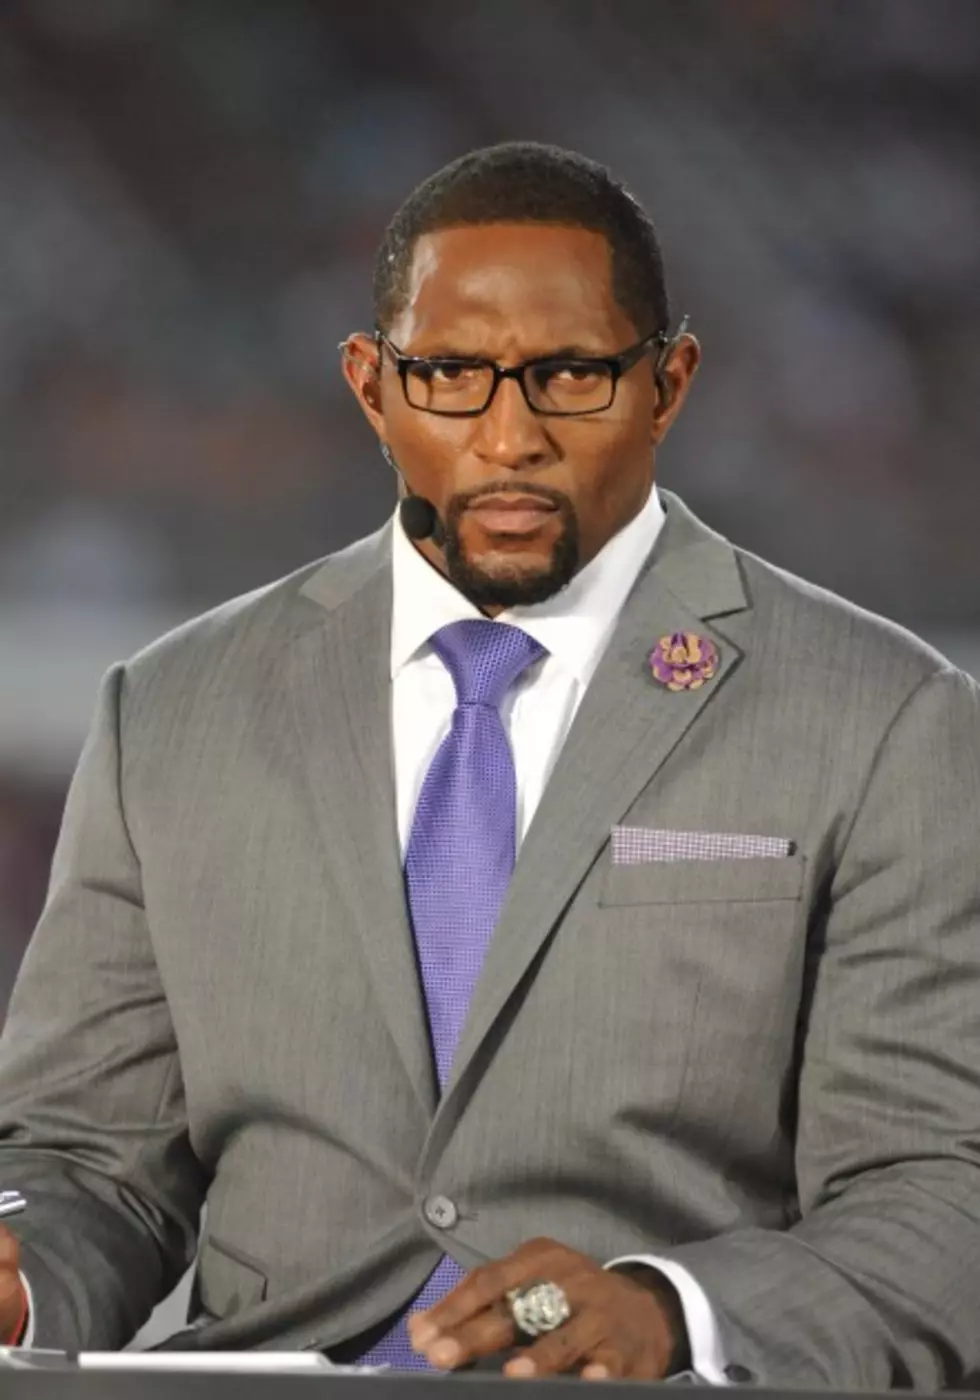 Former Baltimore Ravens Player Ray Lewis Speaks On Baltimore Rioting Situation [VIDEO]